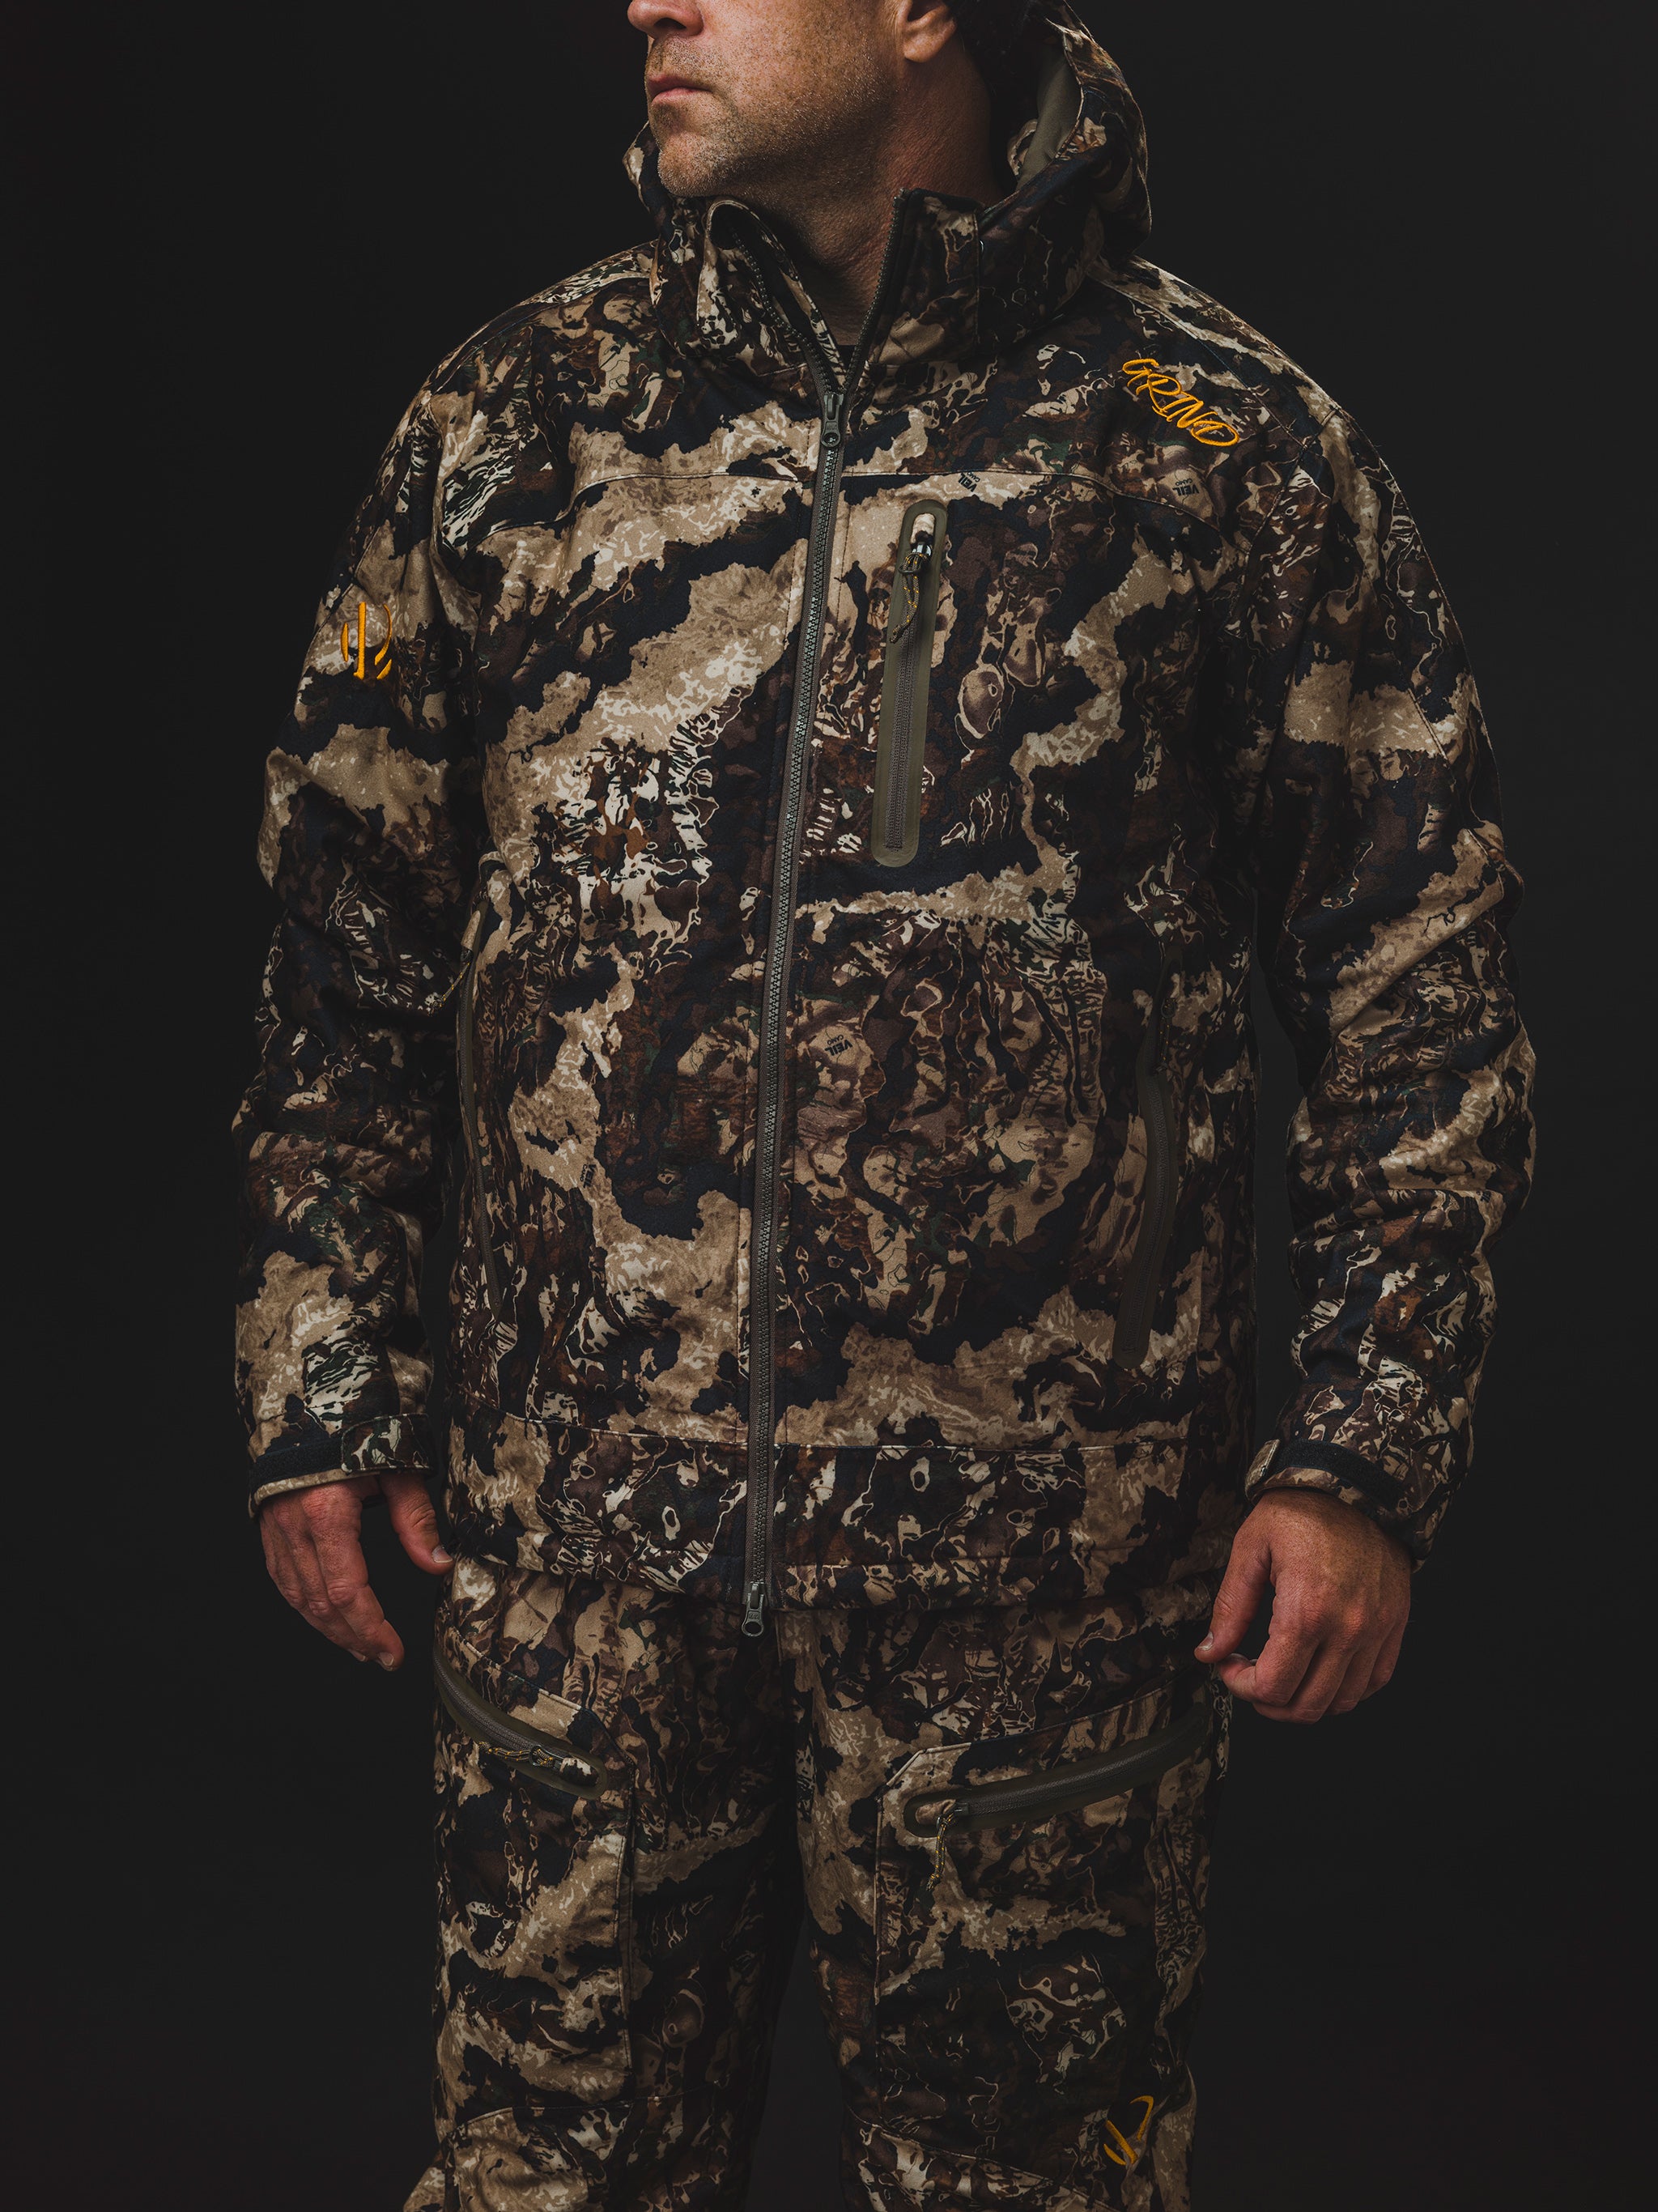  VEIL CAMO Men’s Fleece Chaos Jacket – Noise Reduction Grid  Face, Windproof, 4-Way Stretch, 3 Large Pockets & Attached Hood : Sports 